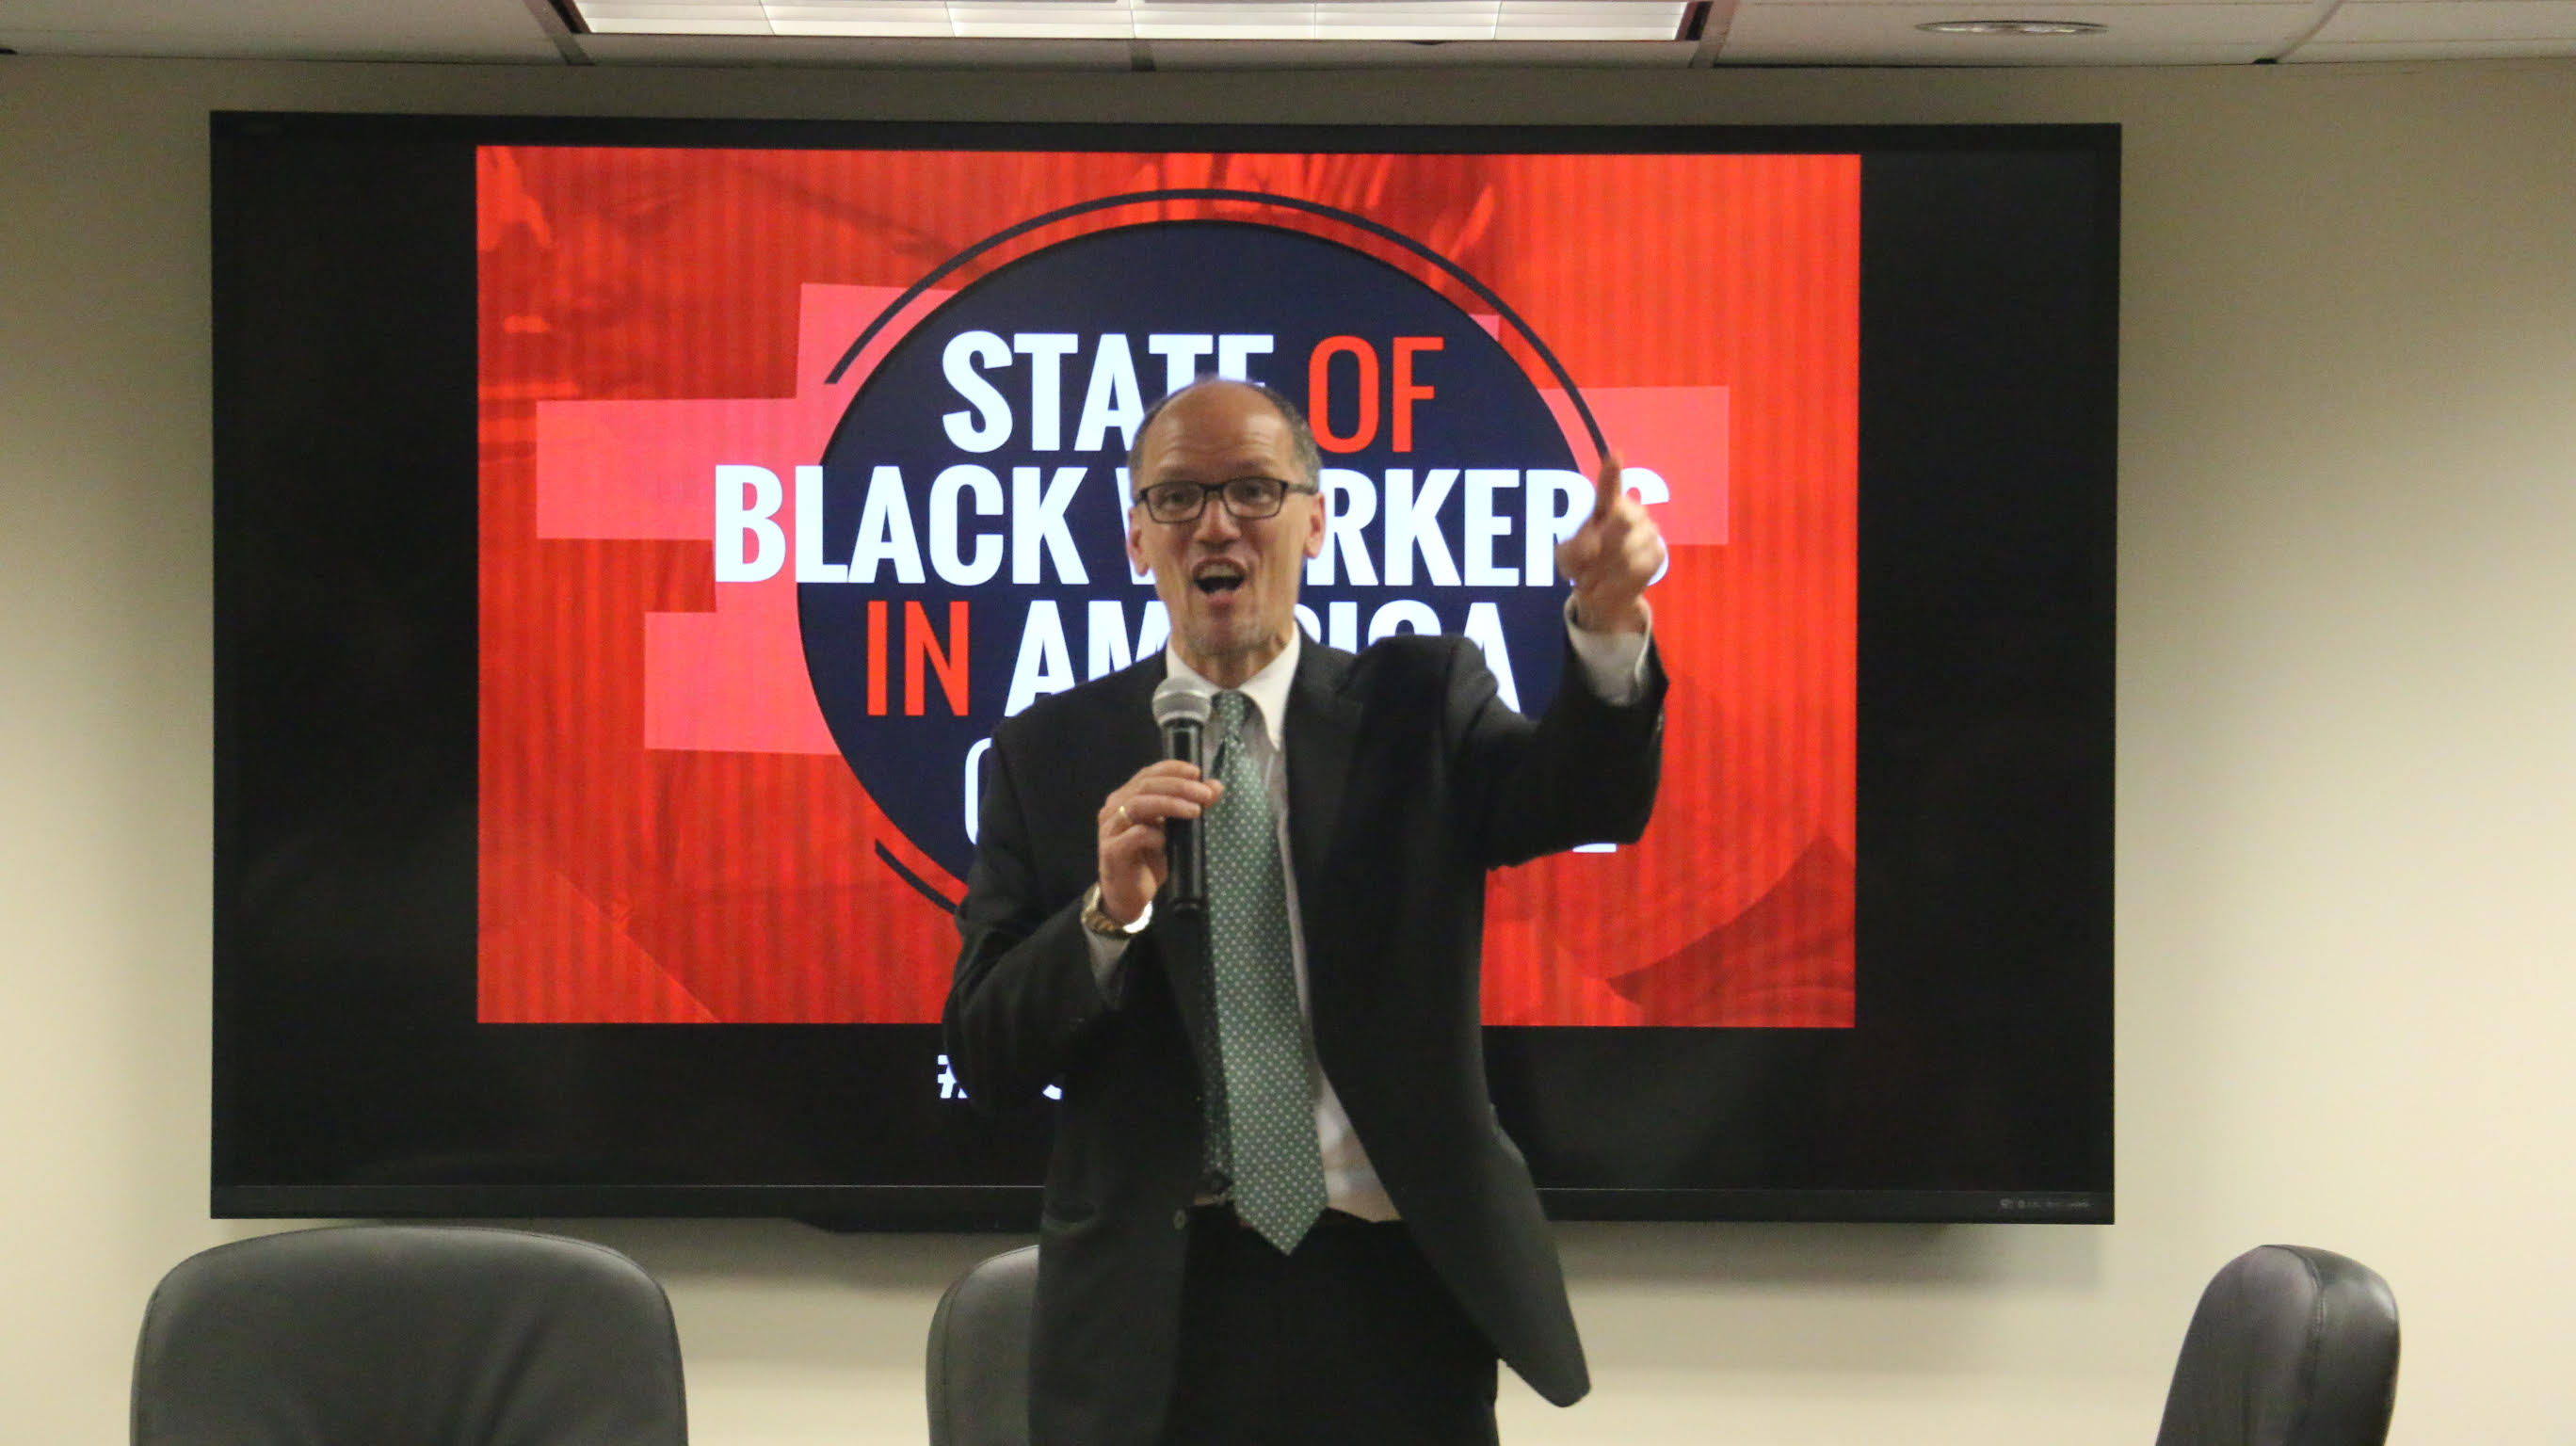 state-of-black-workers-tom-perez